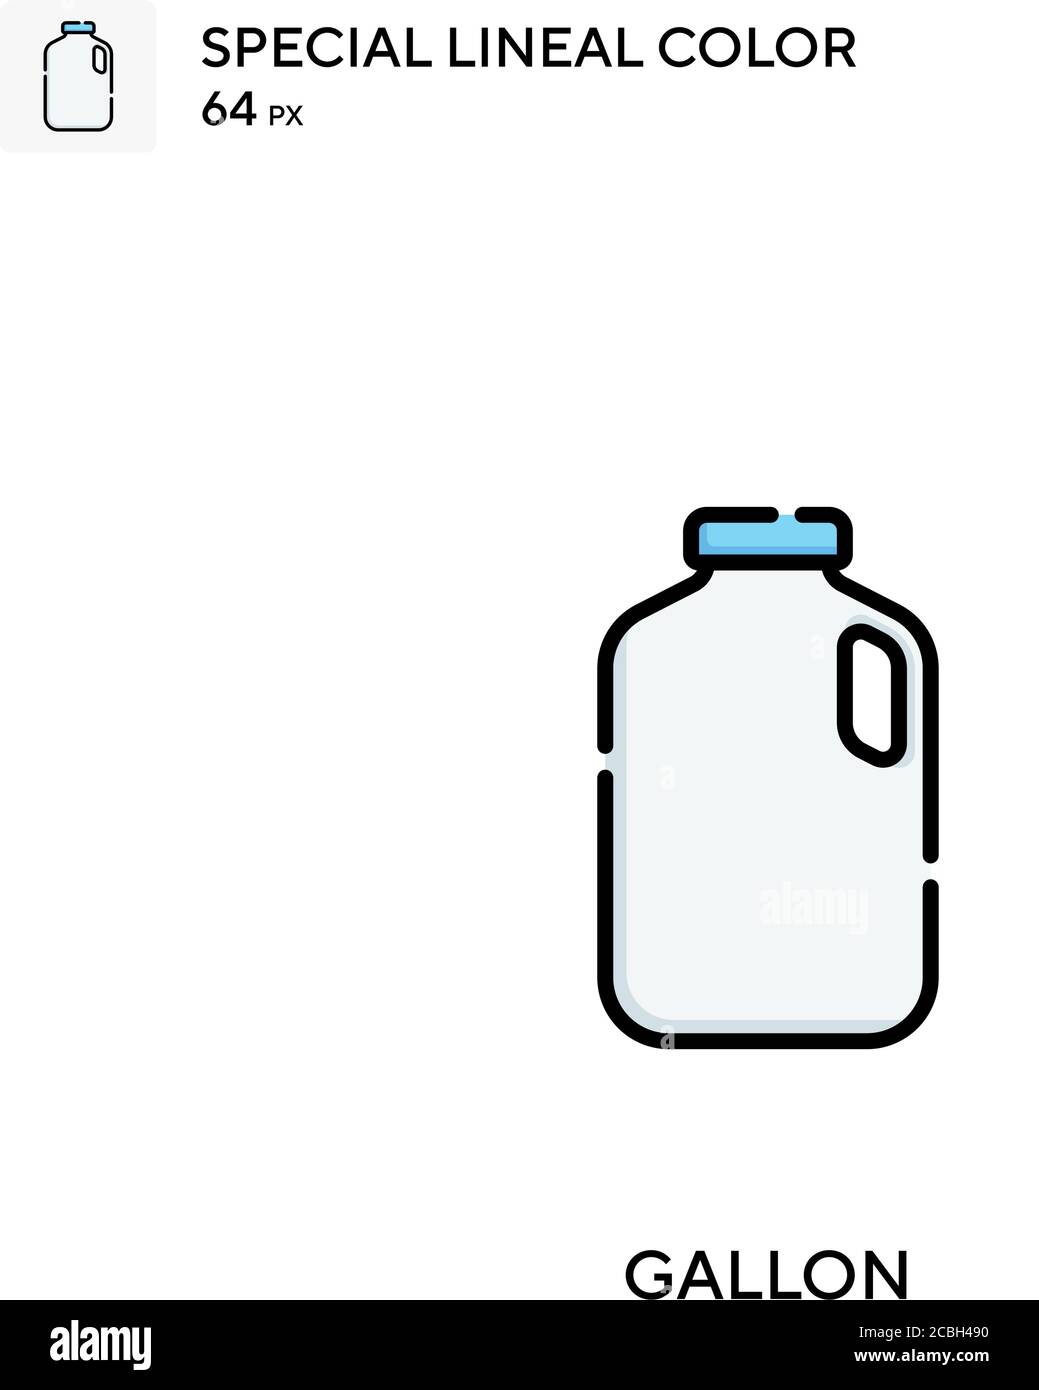 gallon-special-lineal-color-vector-icon-gallon-icons-for-your-business